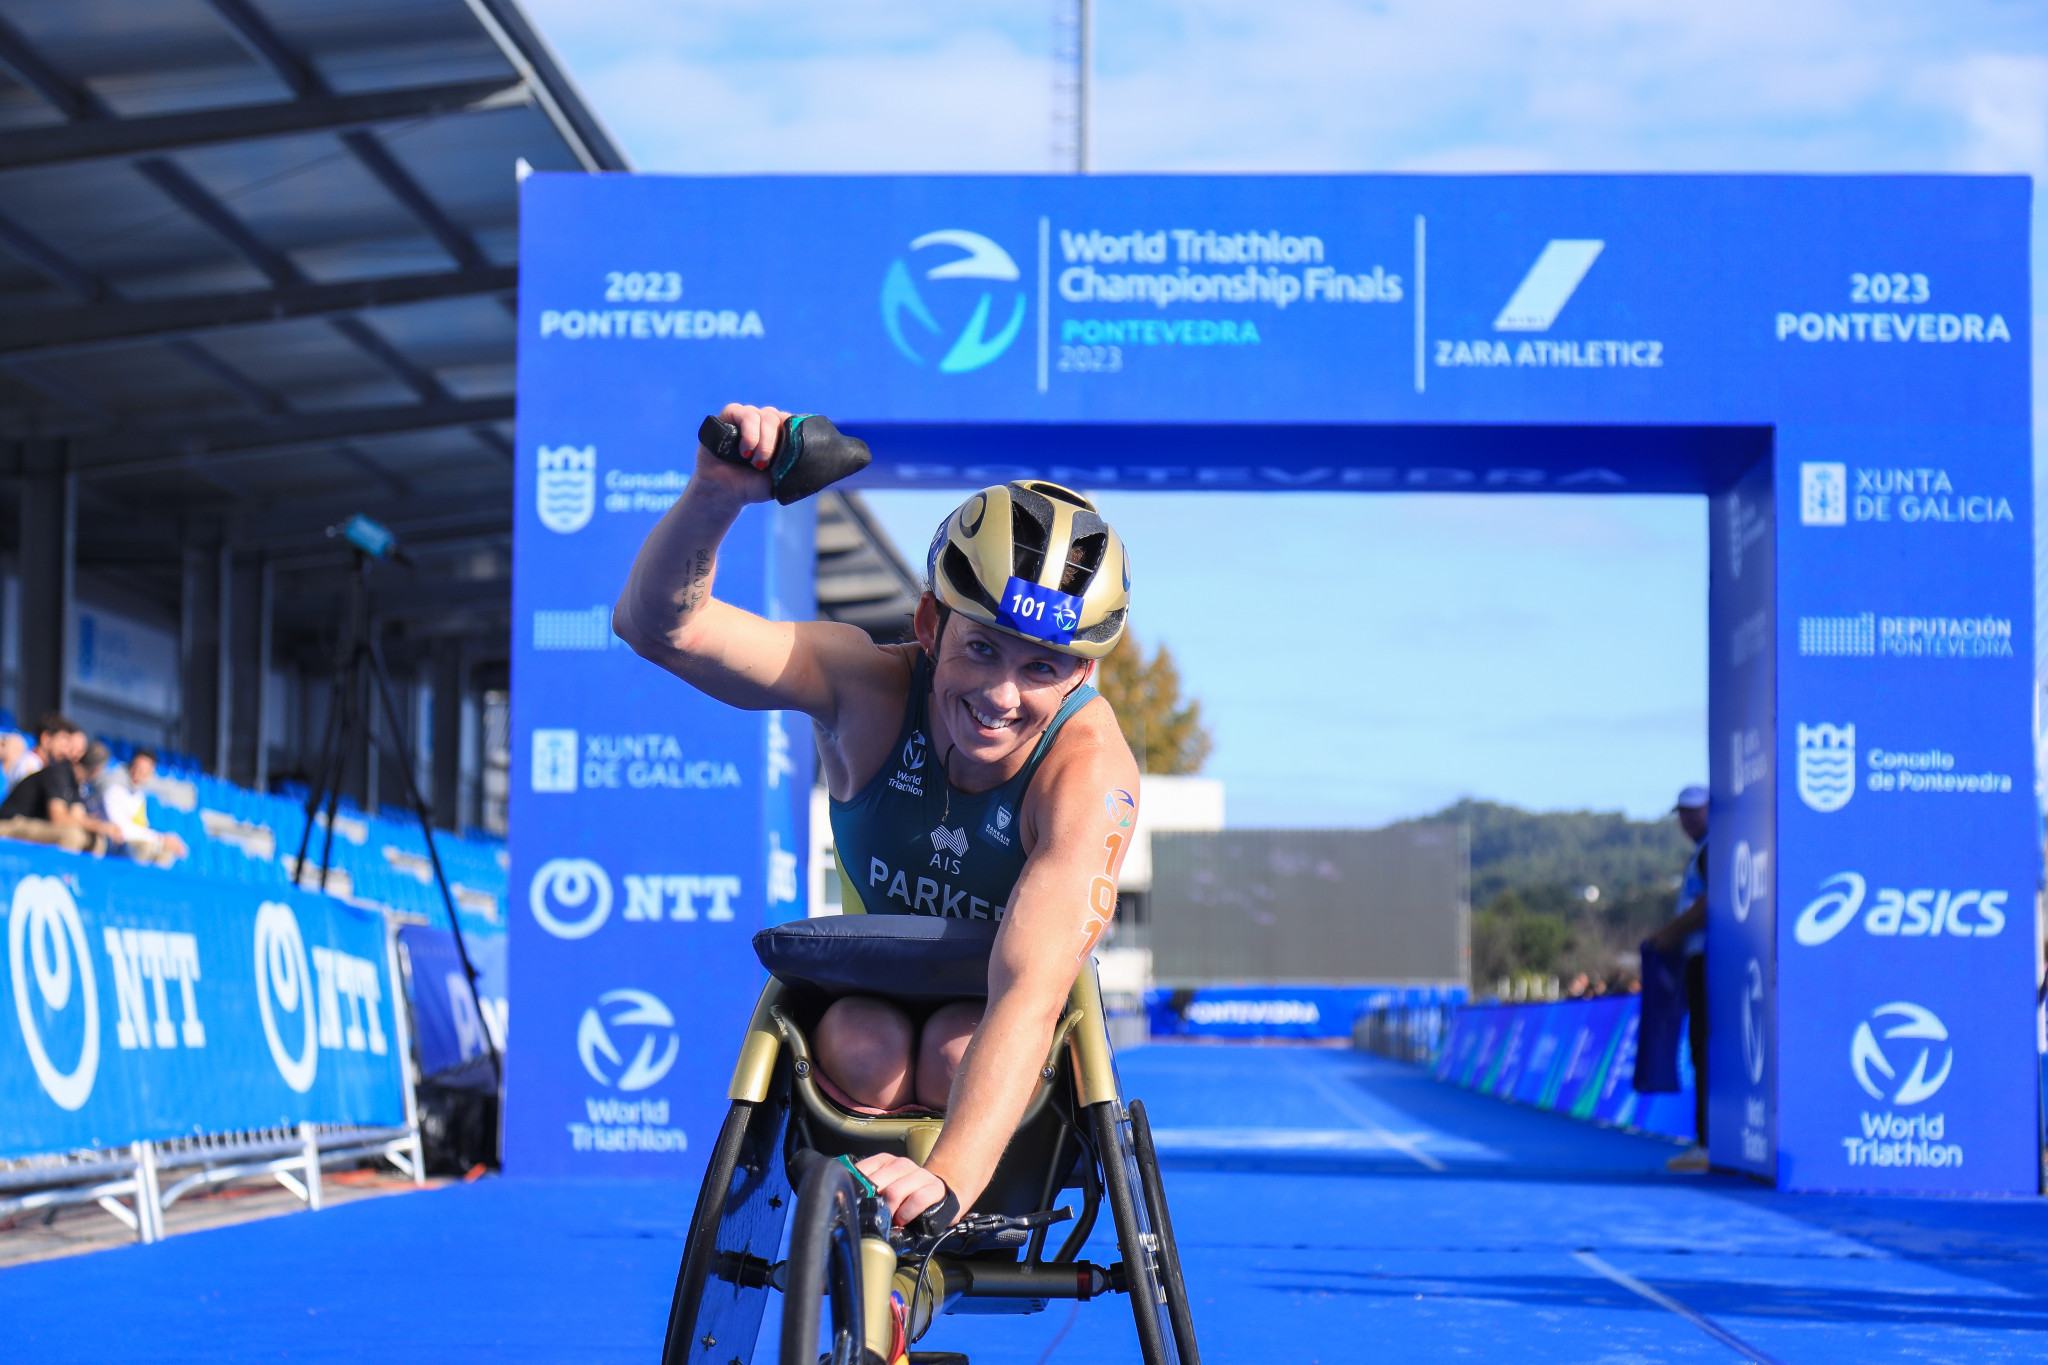 Australia's Lauren Parker won gold in the women's wheelchair race to end the unbeaten run of the United States' Kendall Gretsch which dated back to Tokyo 2020 ©World Triathlon